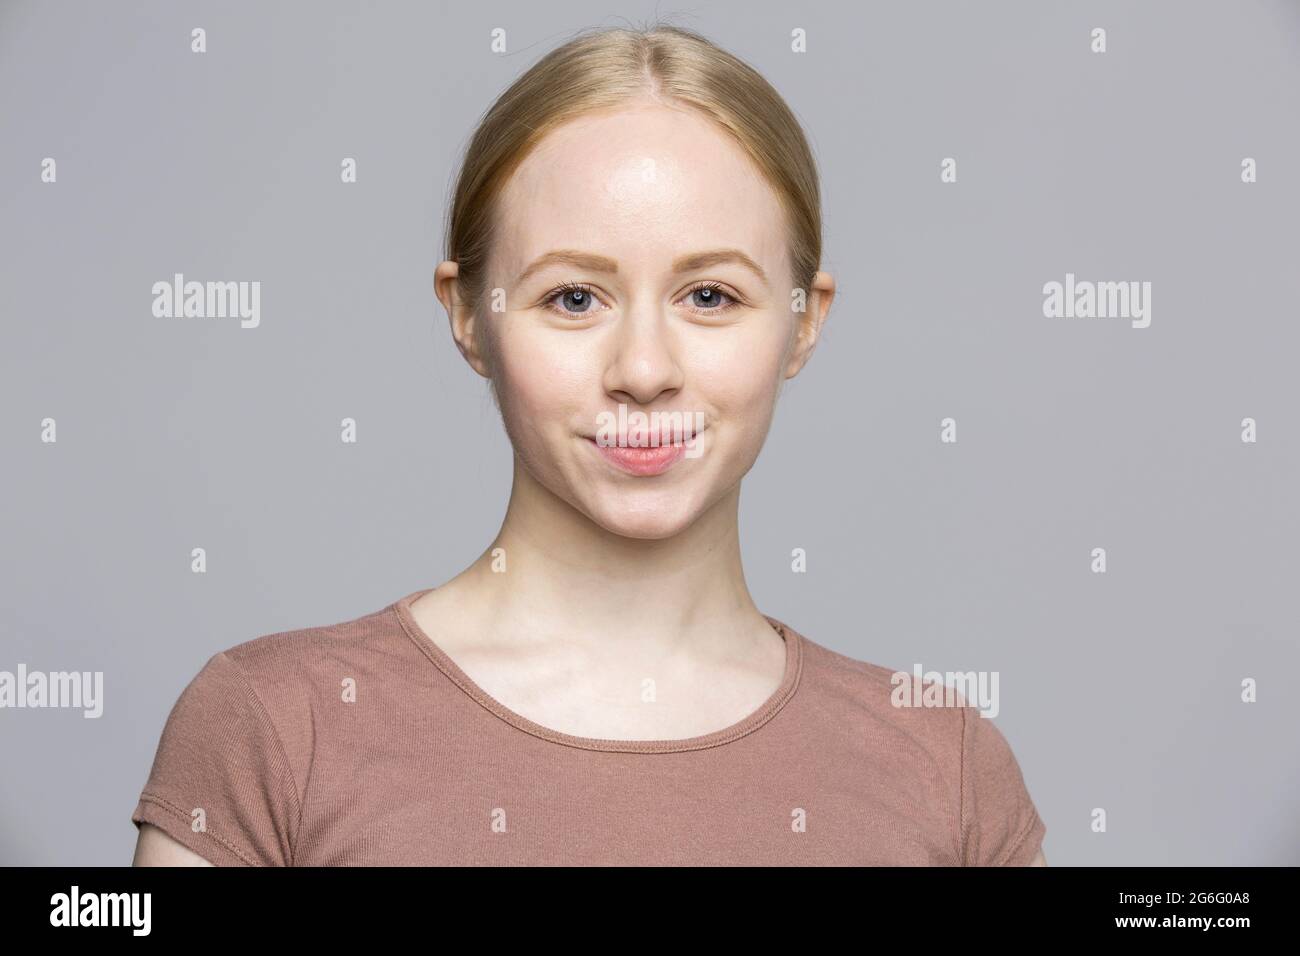 Portrait confident smiling young woman on gray background Stock Photo